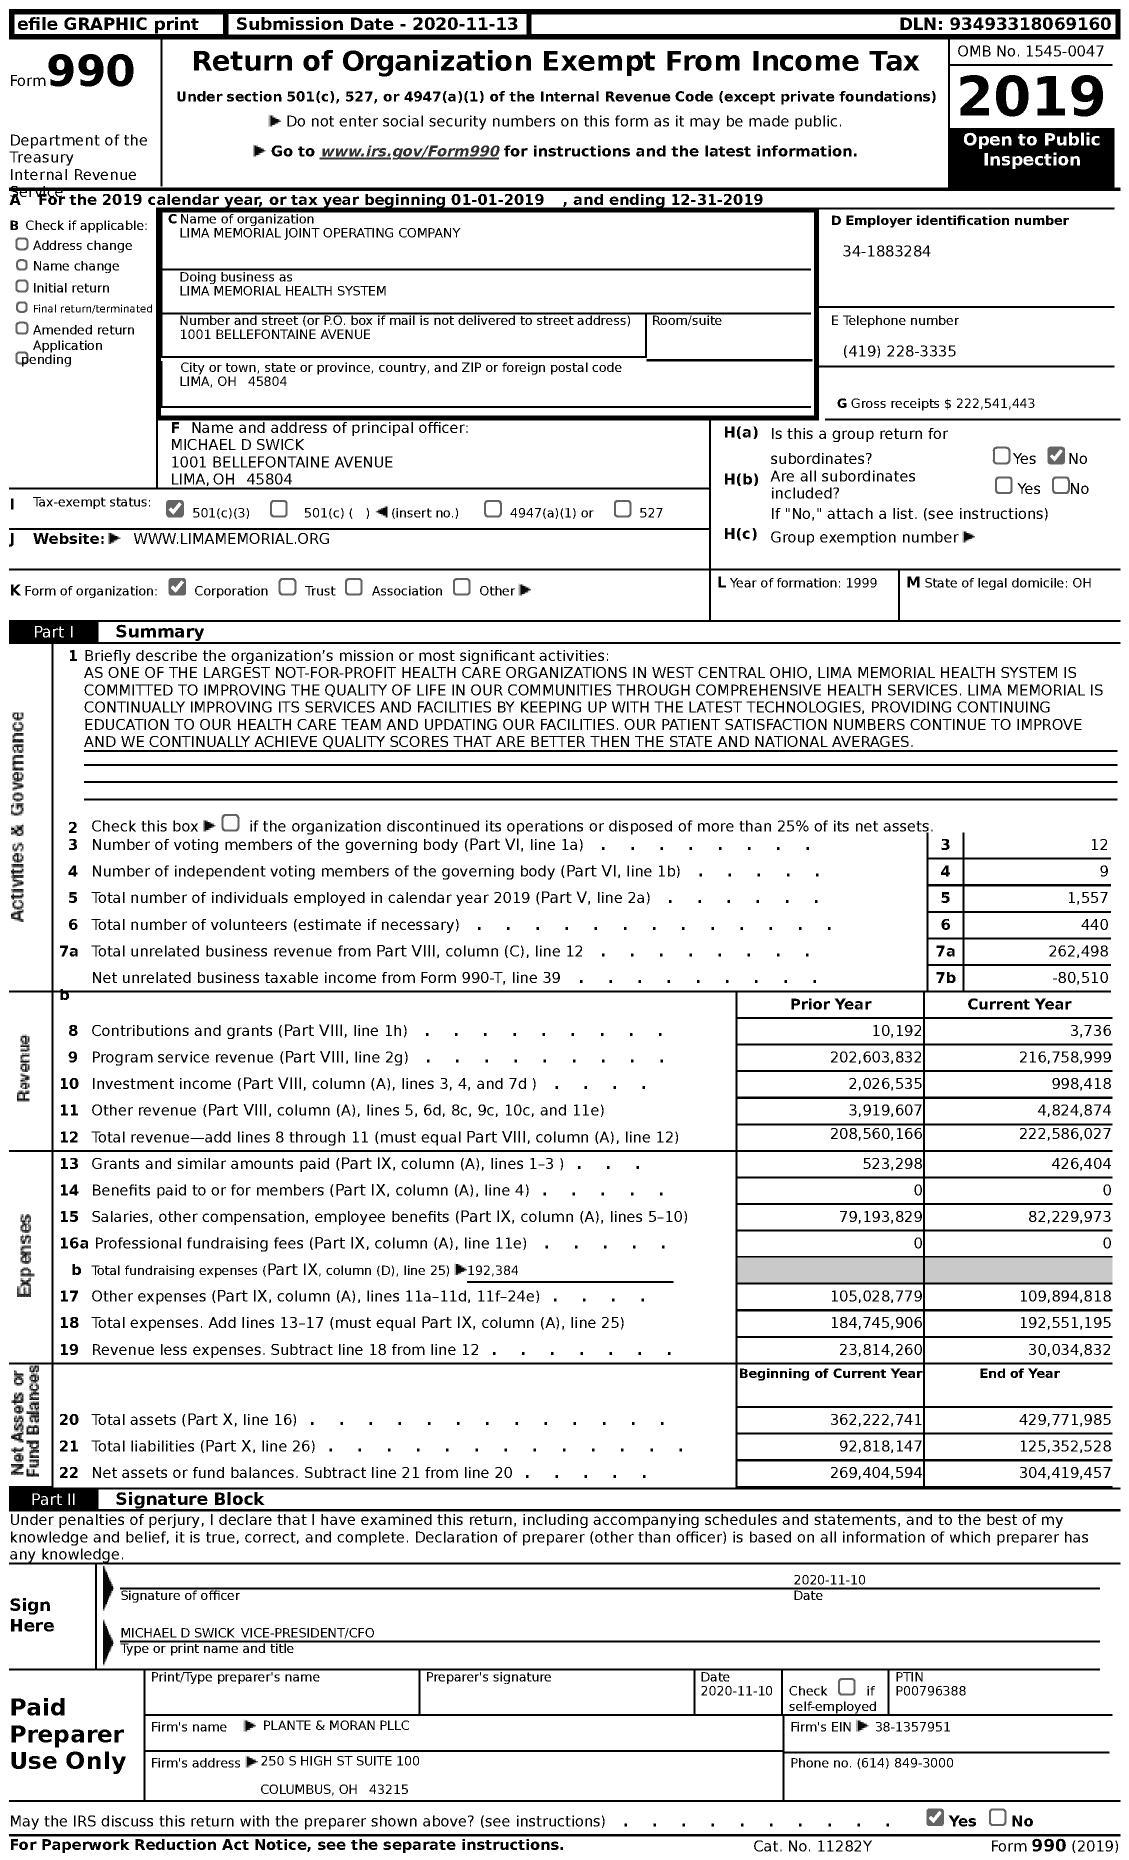 Image of first page of 2019 Form 990 for Lima Memorial Health System / Lima Memorial Joint Operating Company